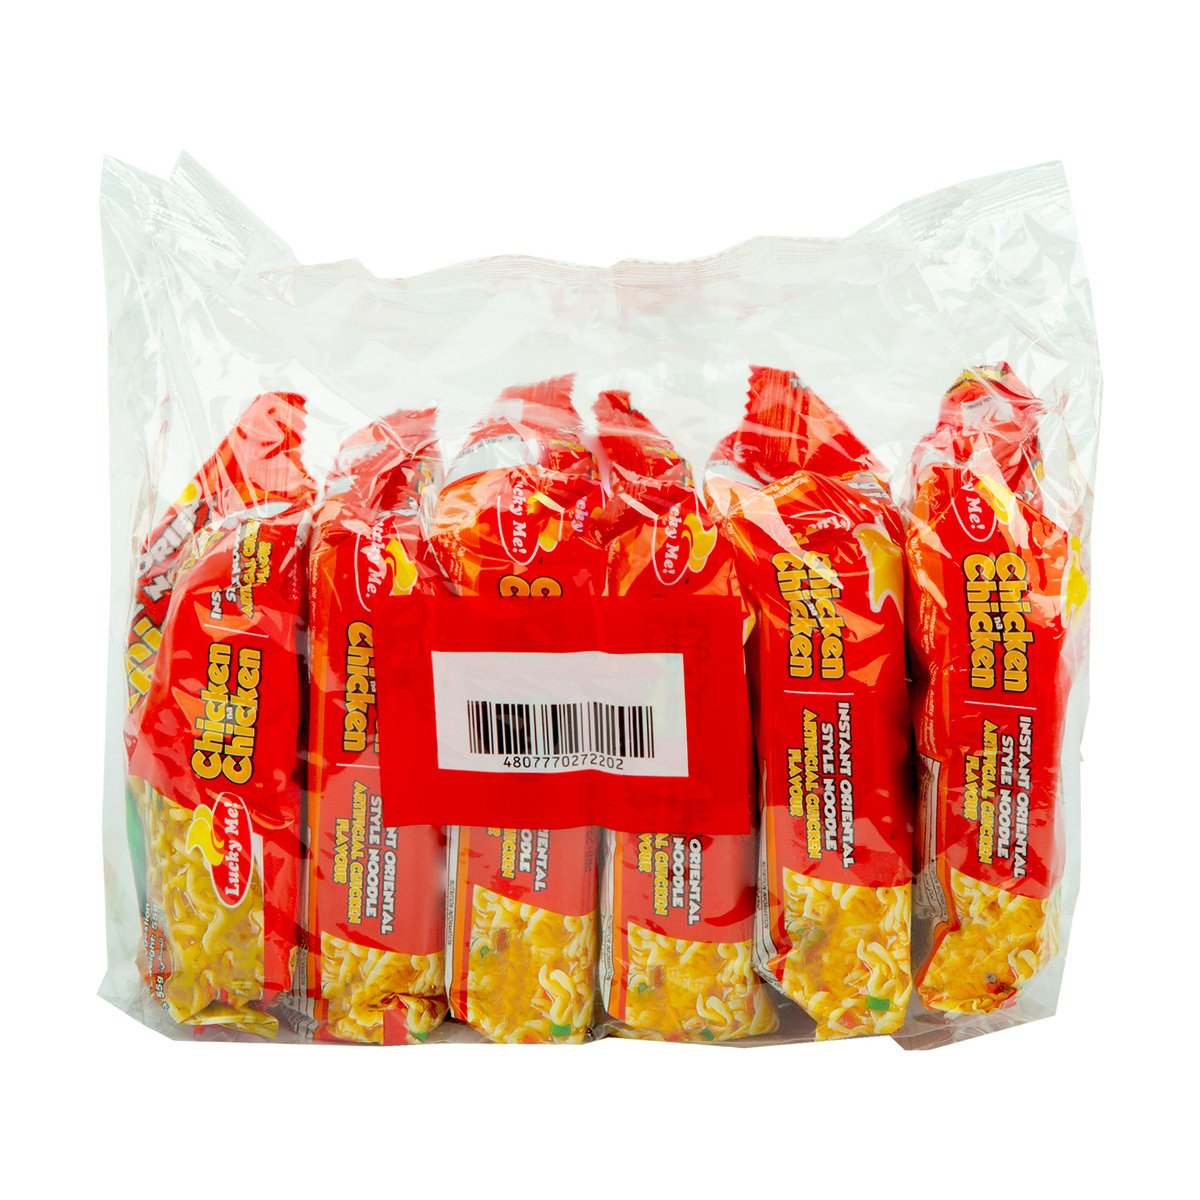 Lucky Me Chicken Noodles 55 g